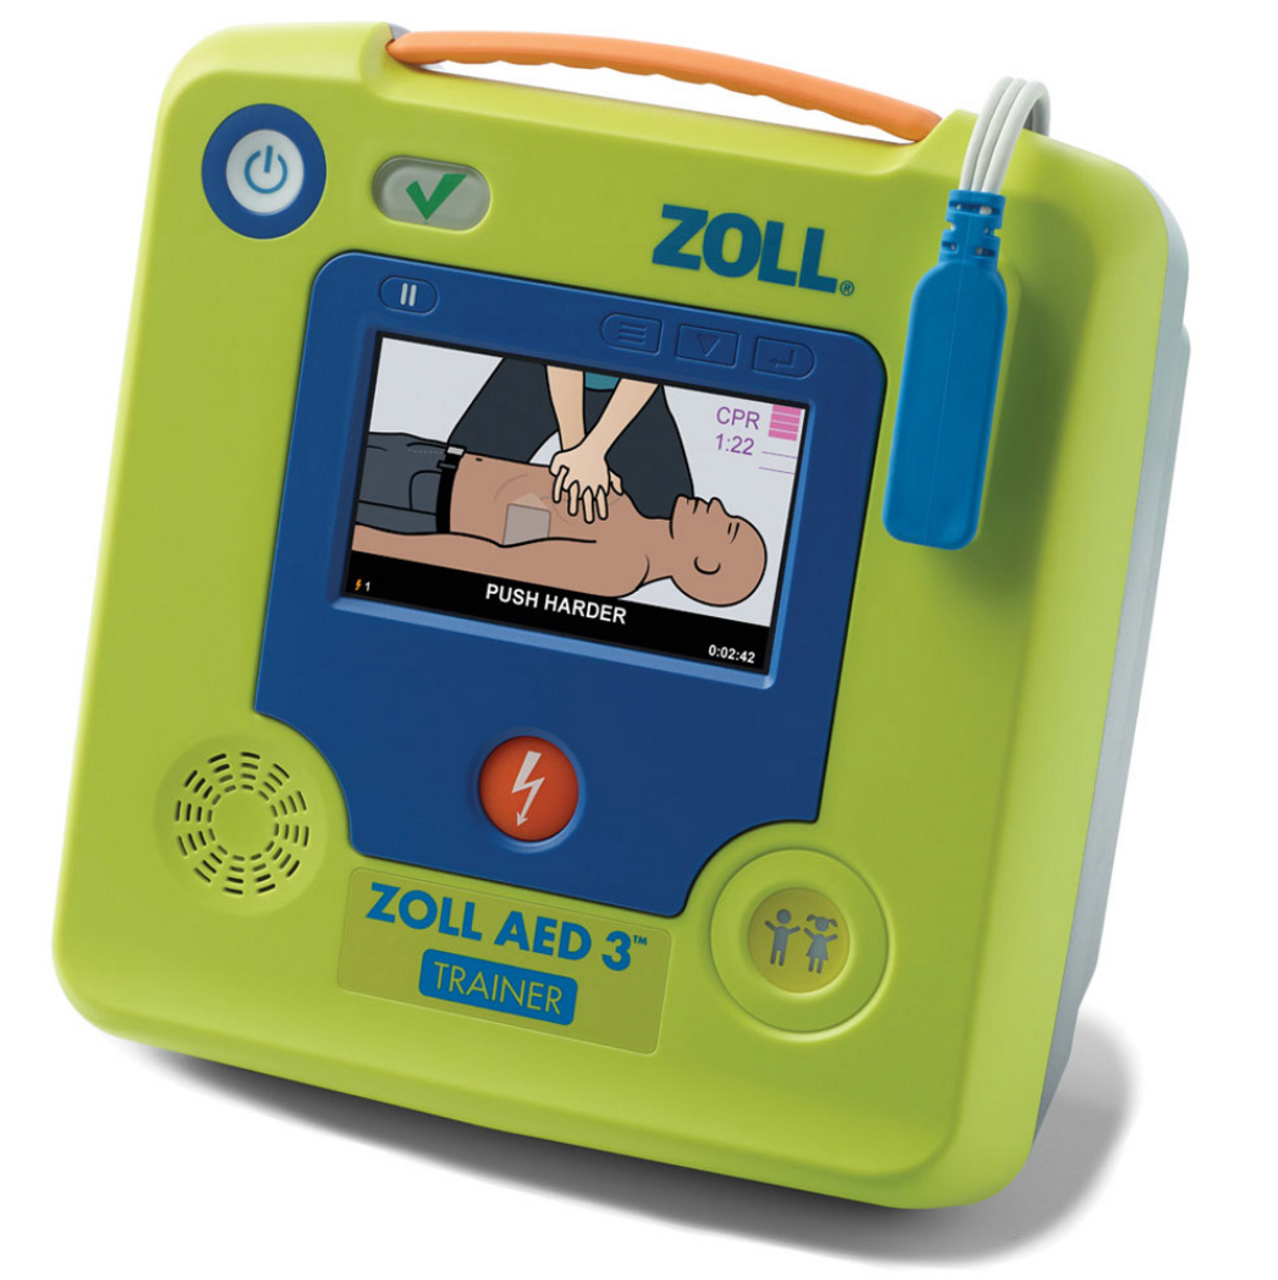 ZOLL AED 3 Trainer (8028-000001-01)